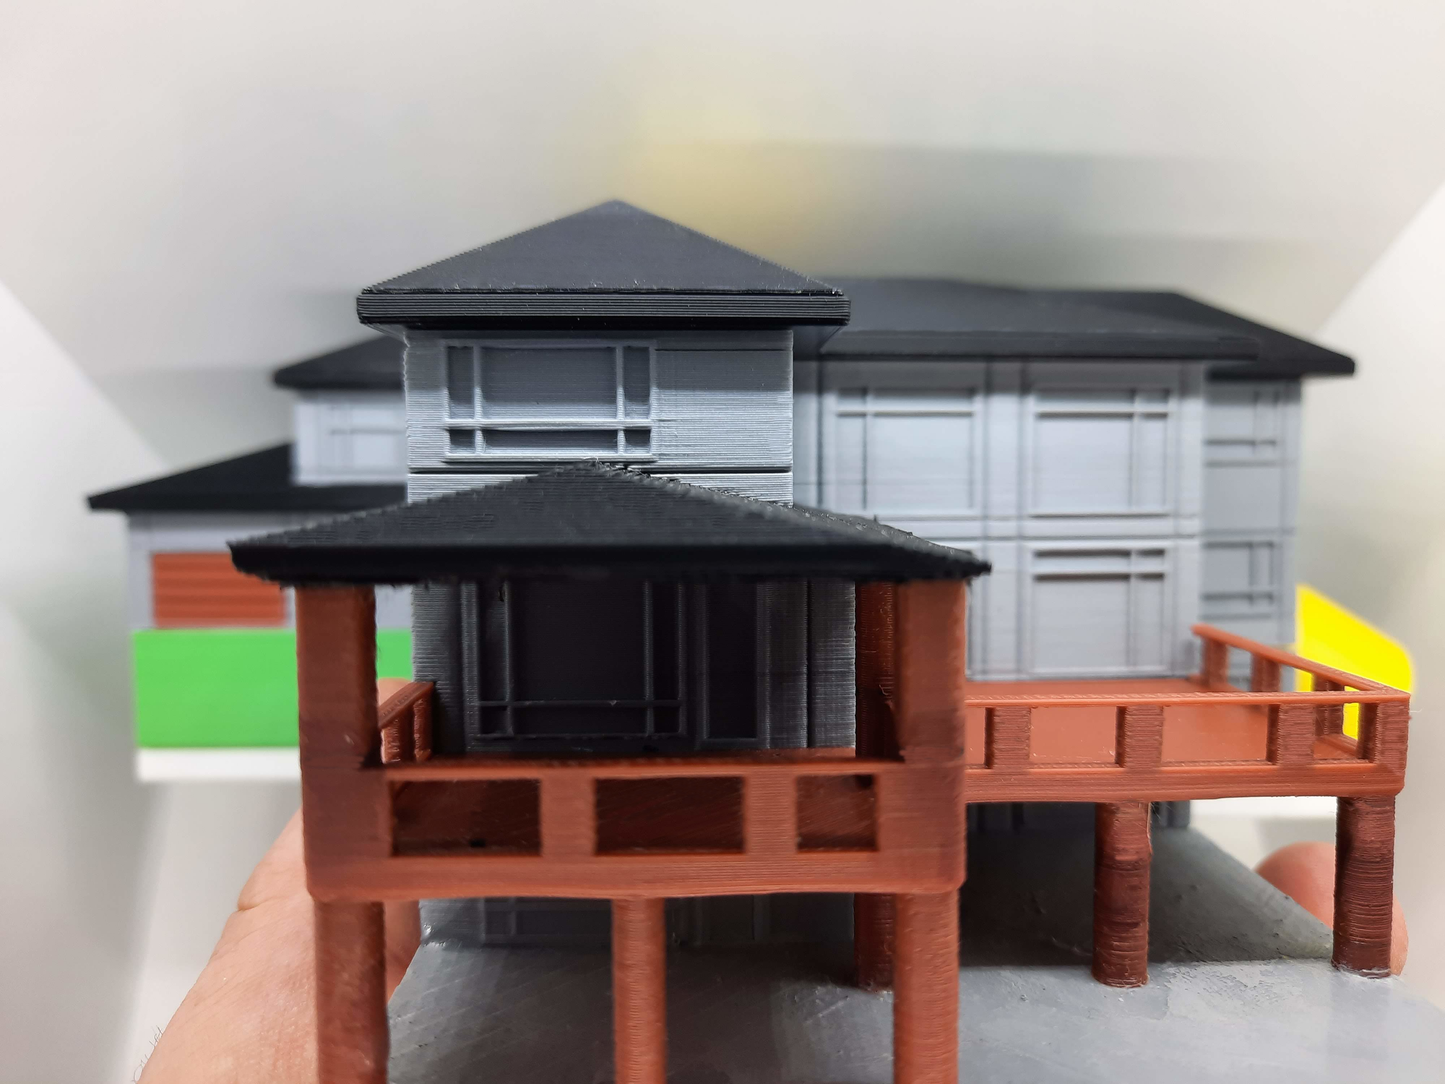 A Desktop Model of Your Home With a Dice Tower Option (Dice Tower Shown)